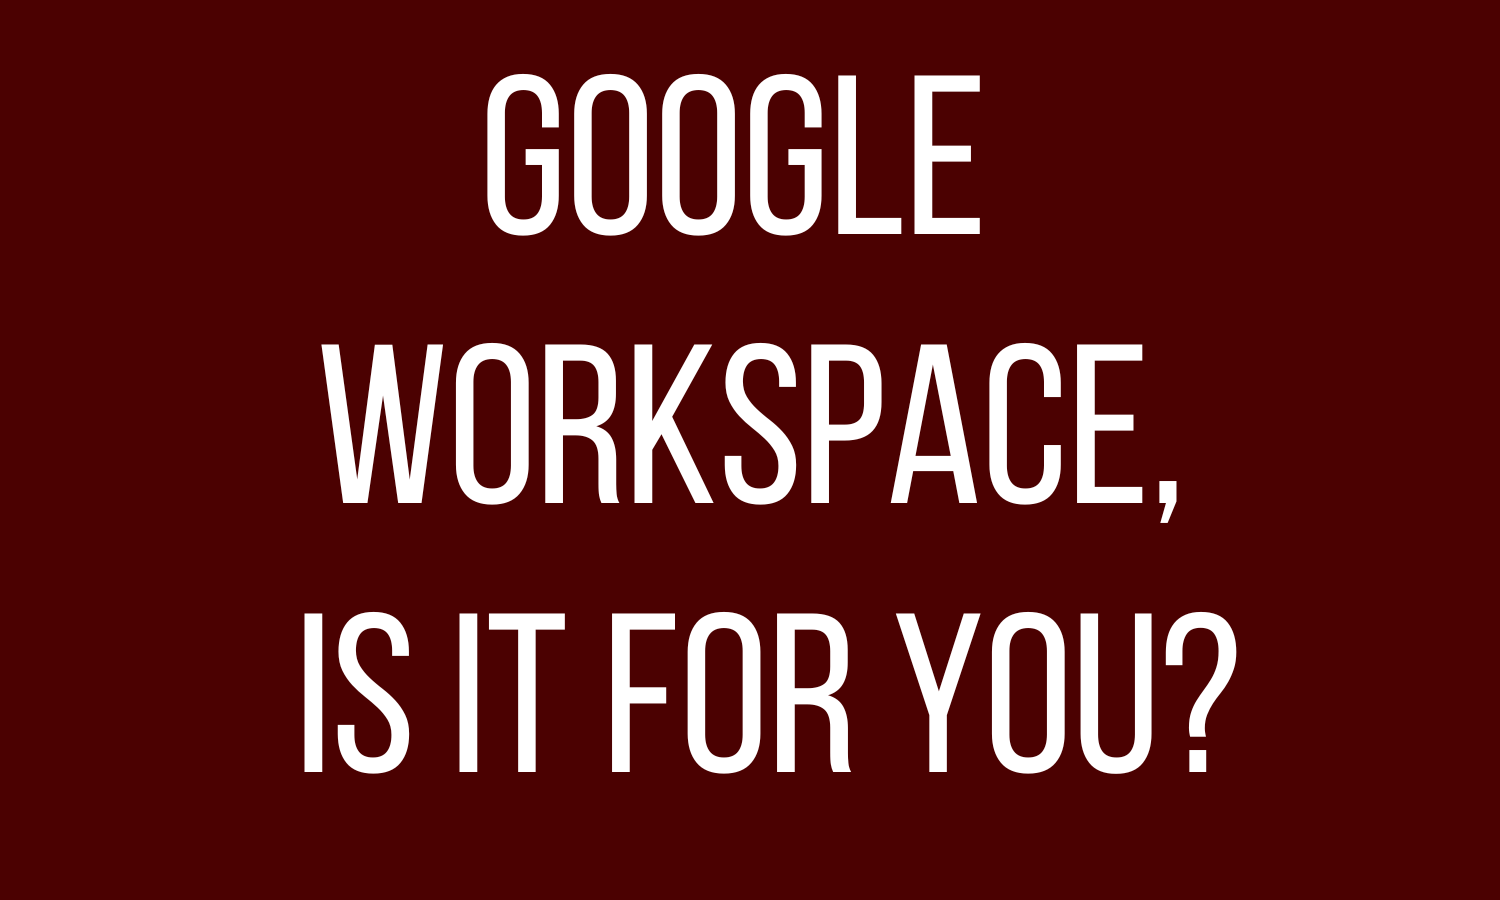 Google Workspace is it For You?